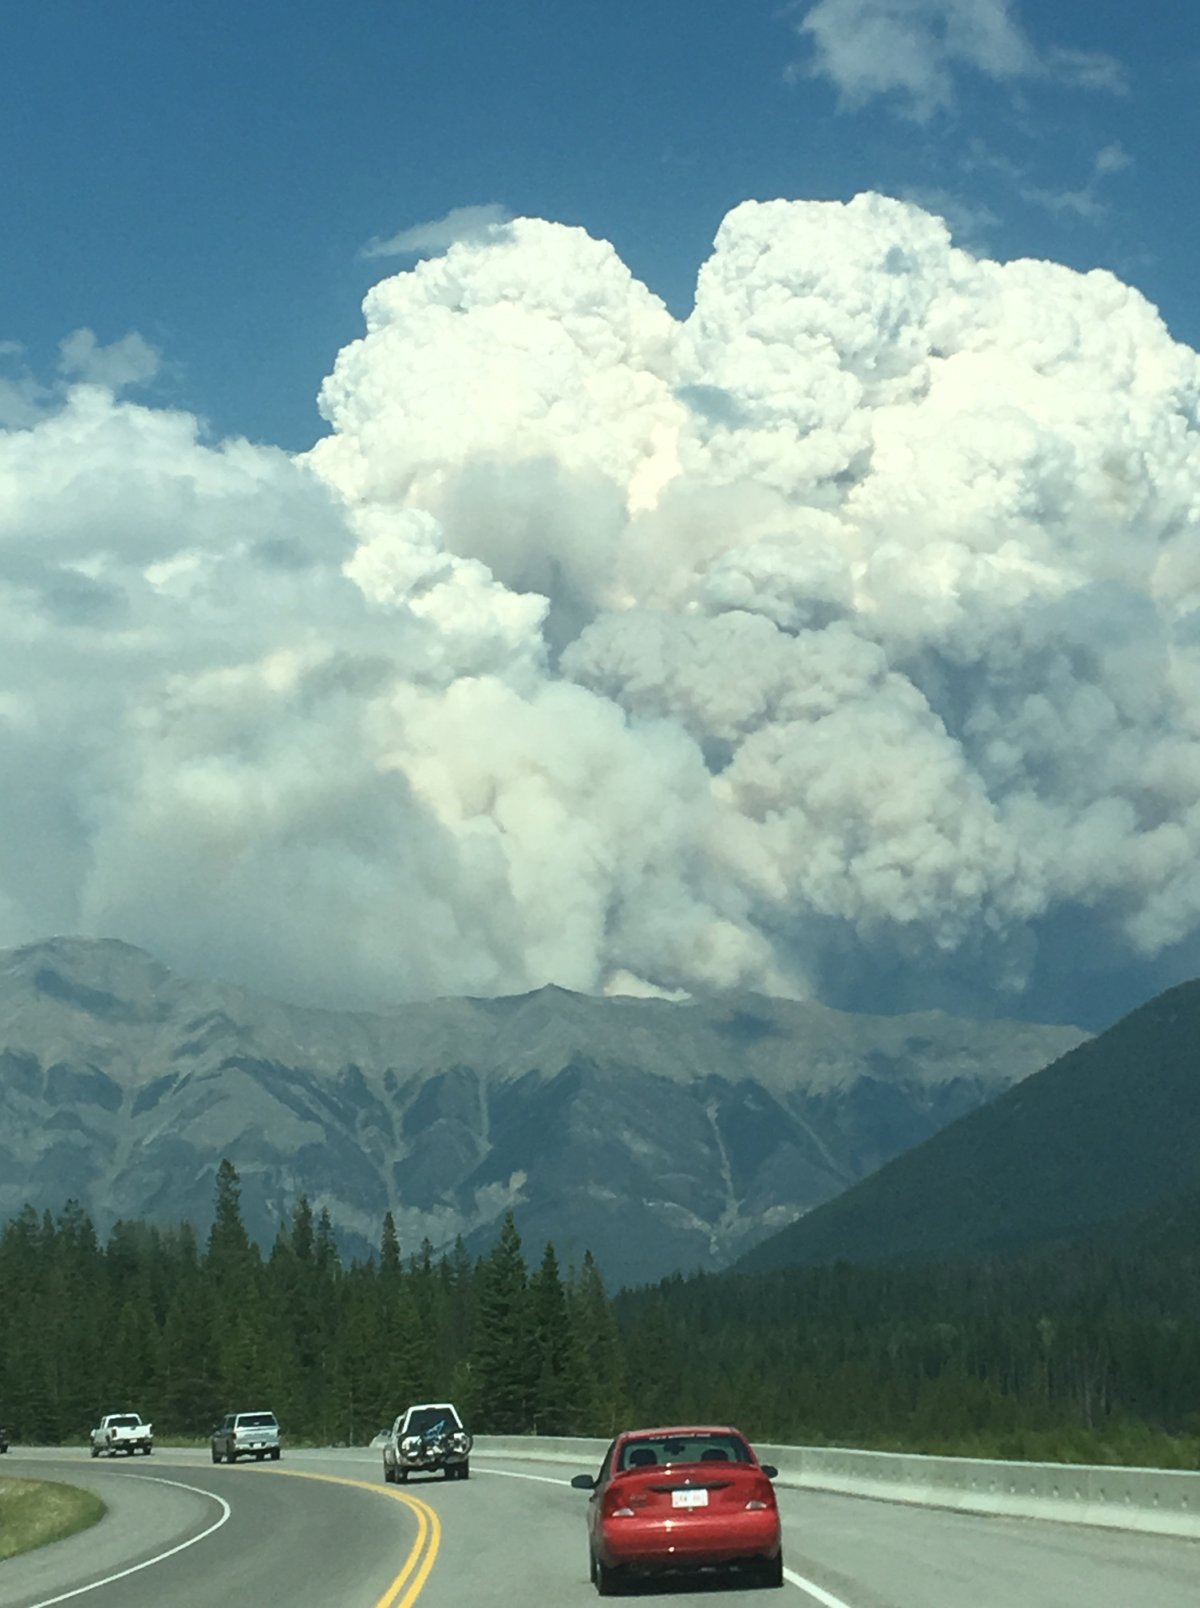 Wildfires in British Columbia have deteriorated air quality in parts of Manitoba.